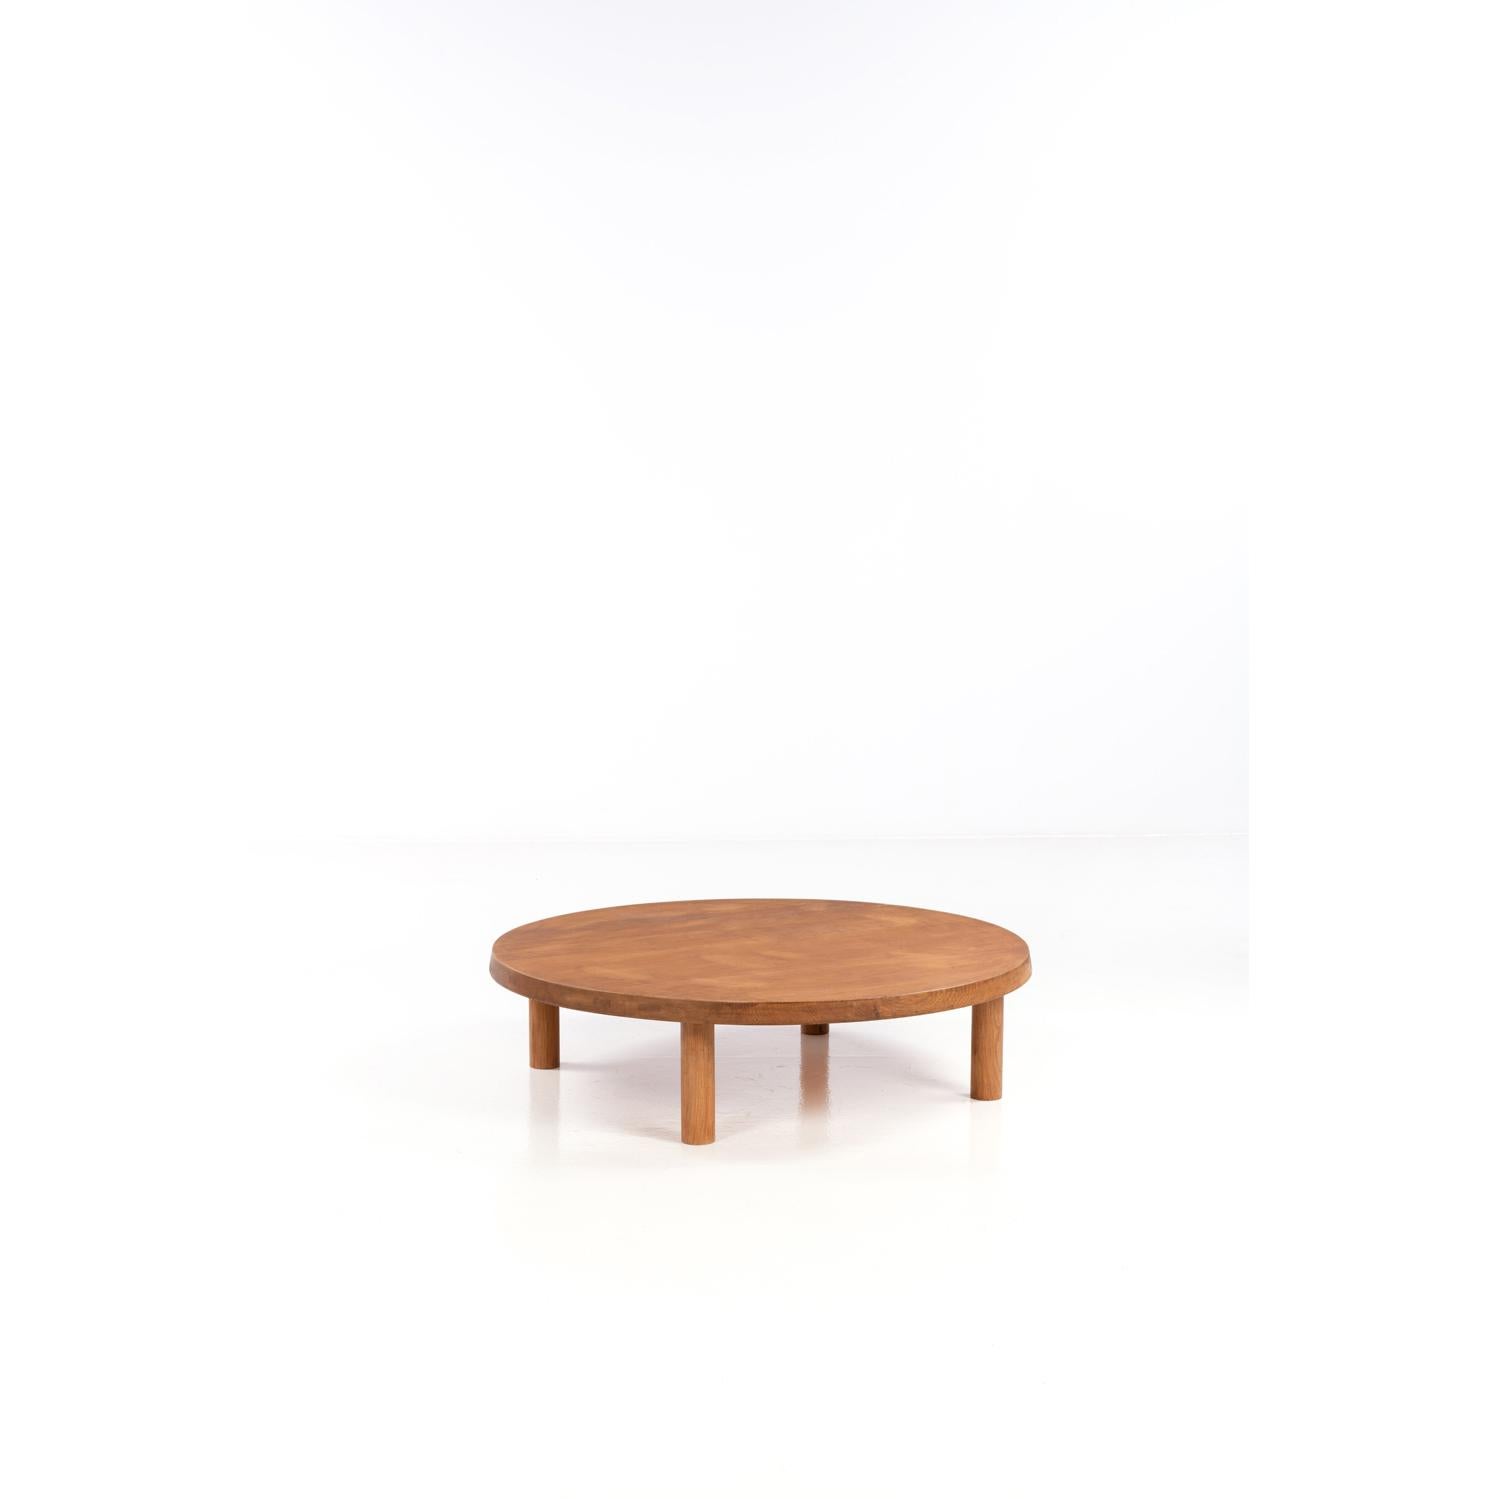 T02 coffee table by Pierre Chapo, France
A classic Pierre Chapo design. Especially the 140cm diameter version is an outstanding piece!
Can be ordered in elm or oak.
The sizes available:
Ø 96cm / 38.6 inches 
Ø 128cm / 50.4 inches
Ø 140cm / 55.1